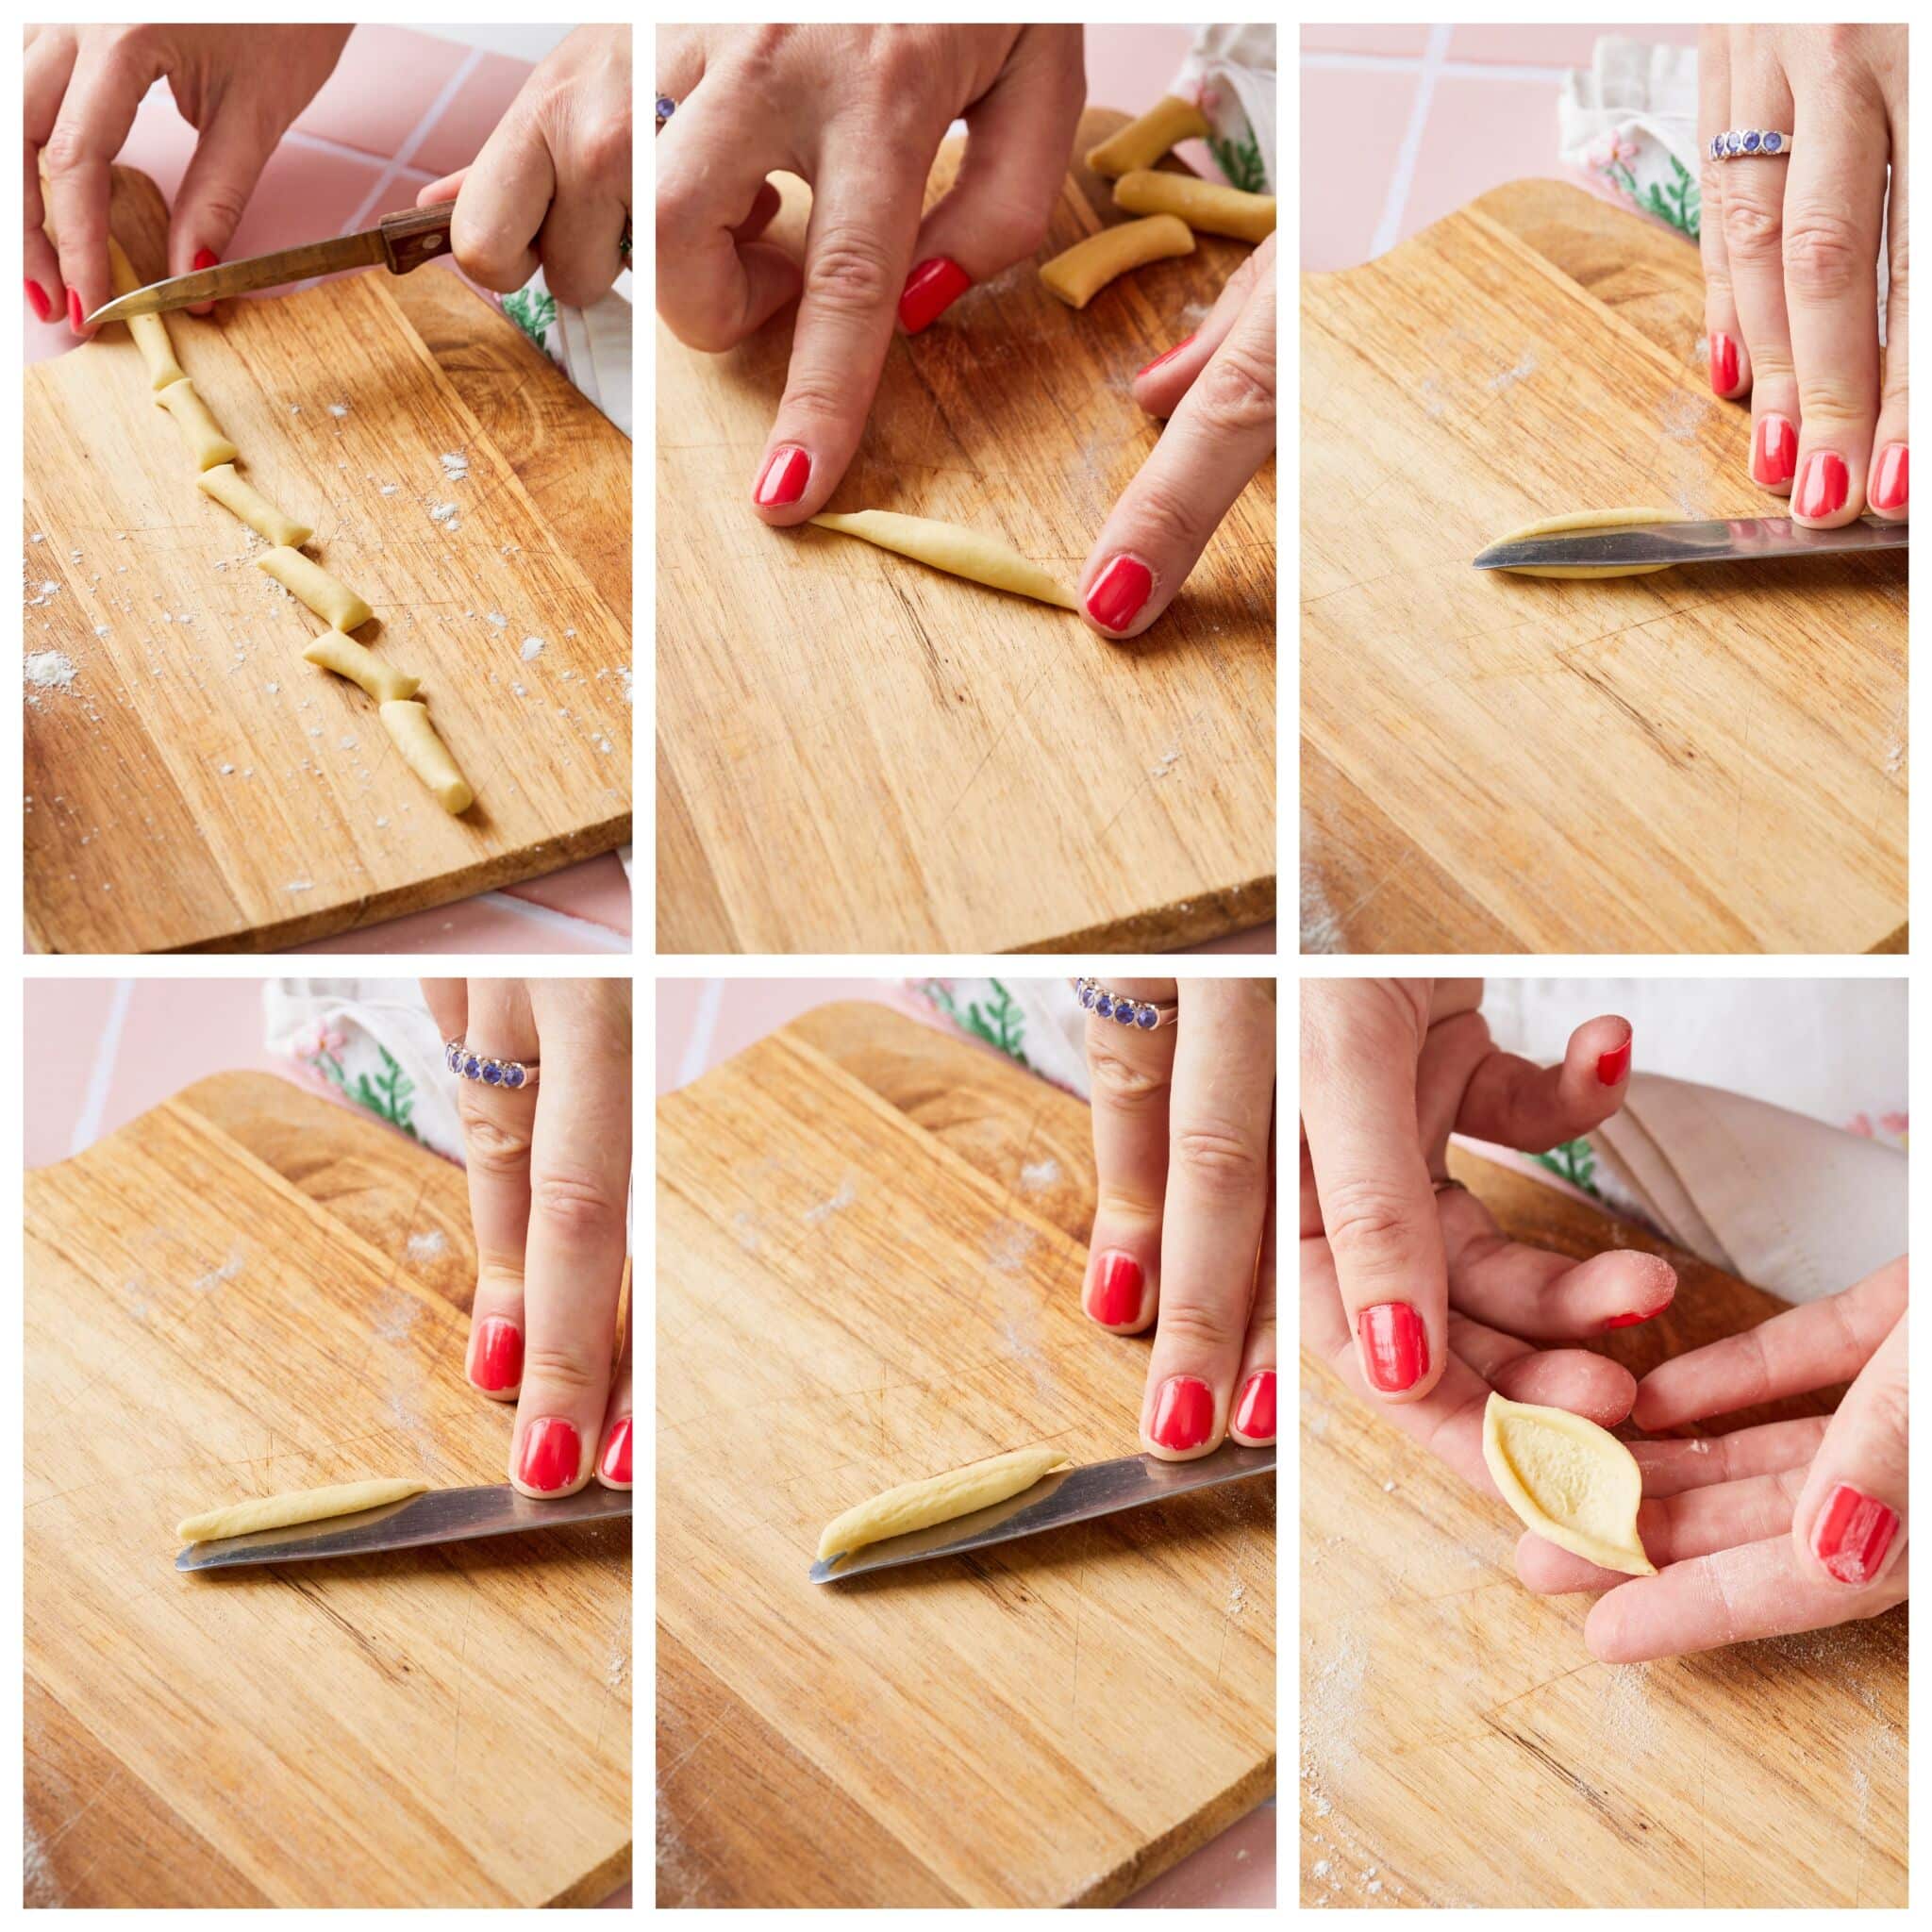 Step-by-step instructions on how to make Olive Leaf Pasta (Foglie d'Ulivo):
Roll a quarter of the dough into a rope and cut it into 1 1/2 inch (4 cm) pieces.
Take one piece of dough at a time, and roll so it's tapered at both ends.
Hold down one end of a piece of dough, and holding a table knife at a slight angle, press into the center of the dough lengthwise and drag down and away from you to create the leaf shape.
As soon as you finish a piece, place it on the semolina-dusted baking tray.   